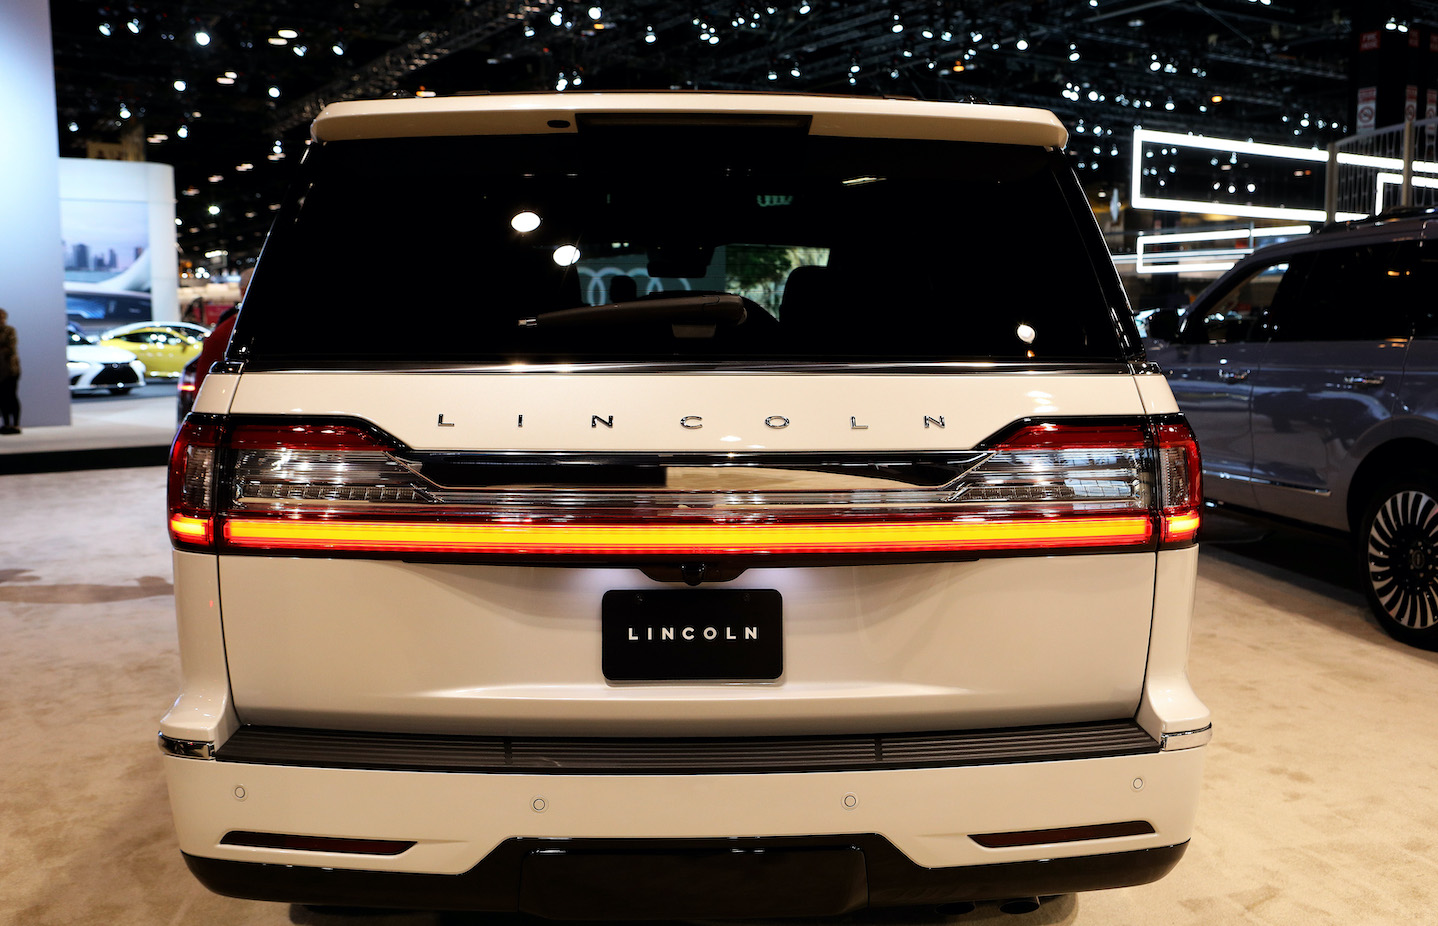 2019 Lincoln Navigator is on display at the 111th Annual Chicago Auto Show at McCormick Place